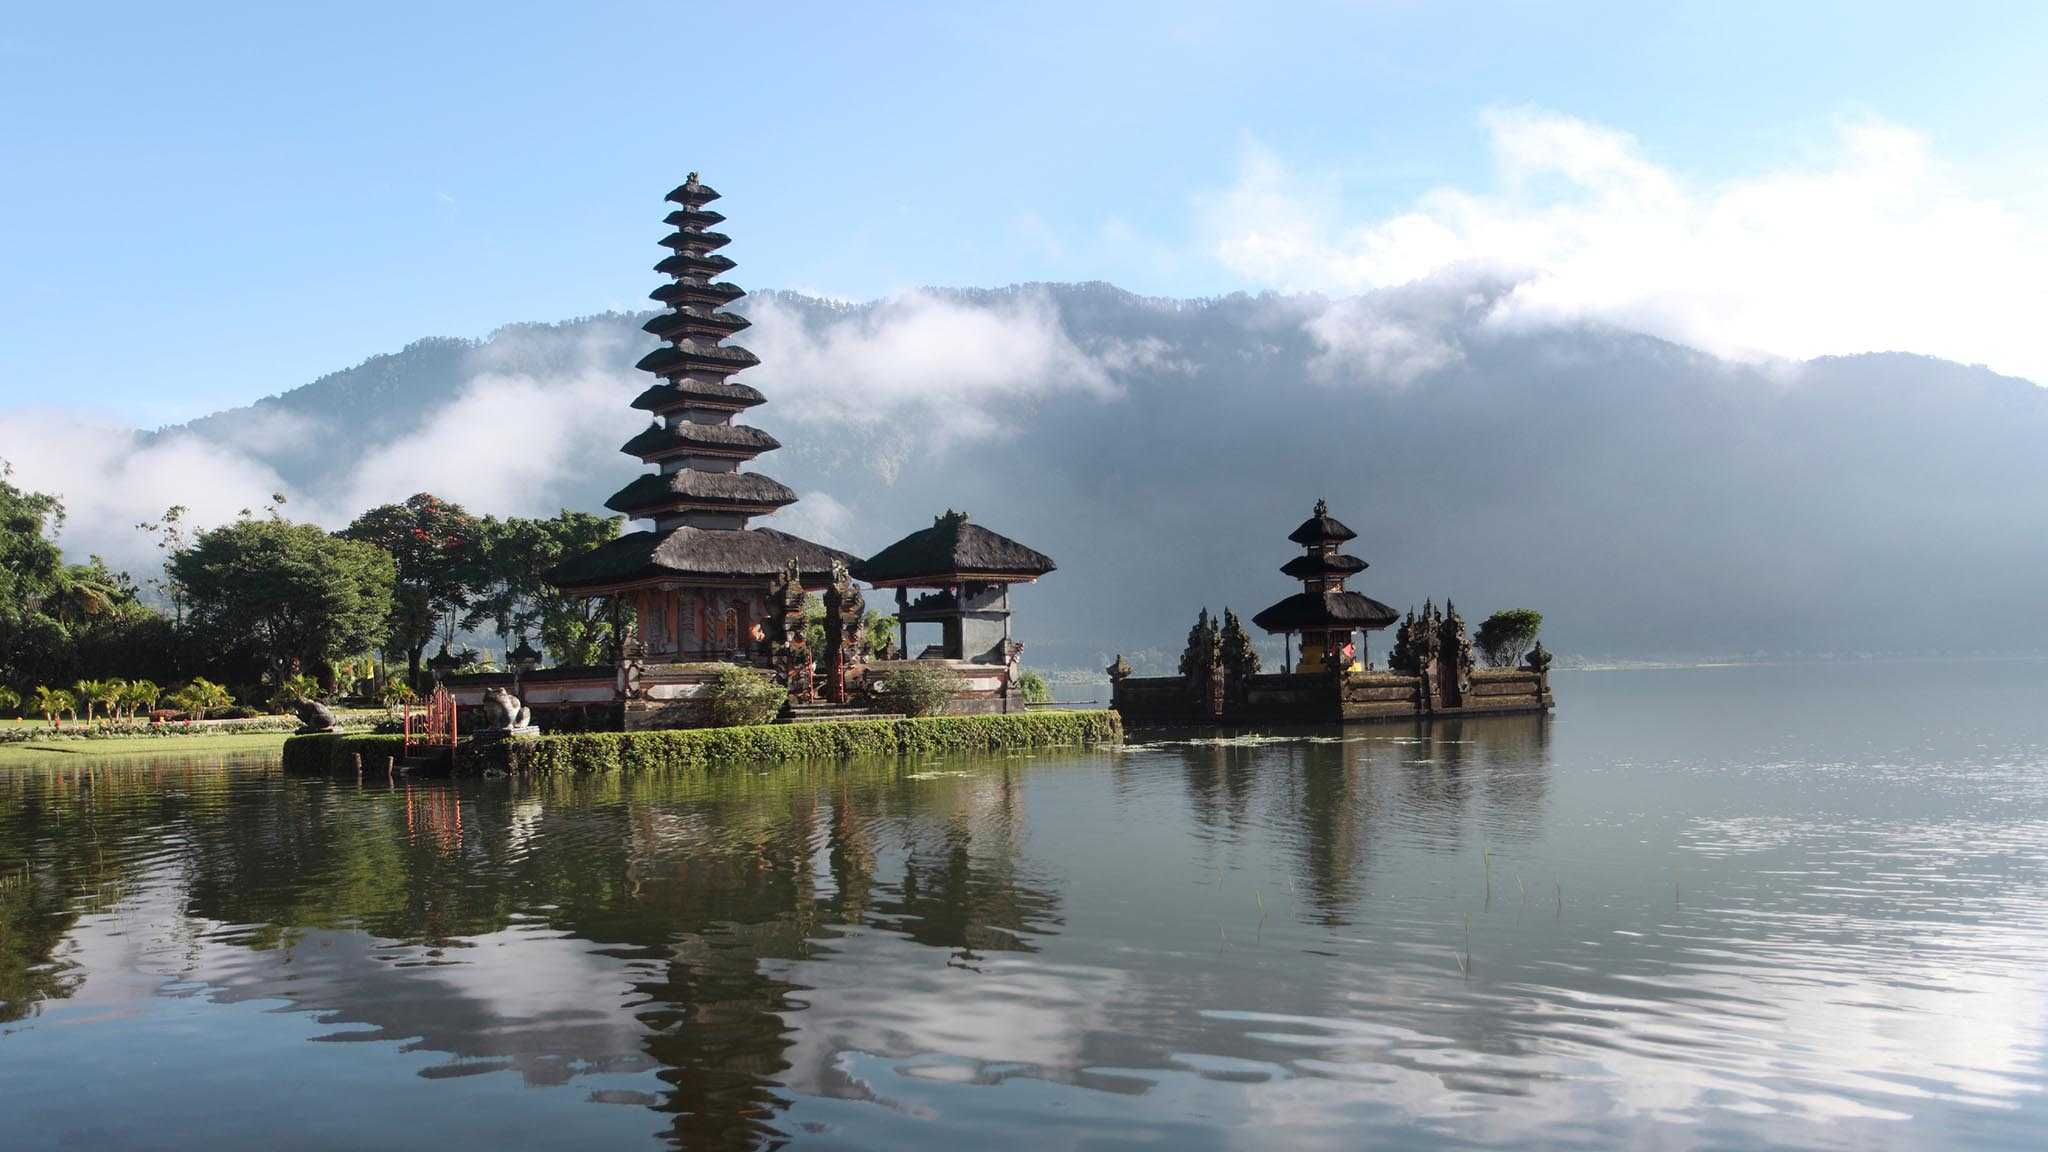 Bali‘s Expat Community - Find Forums, Jobs, Events & Housing